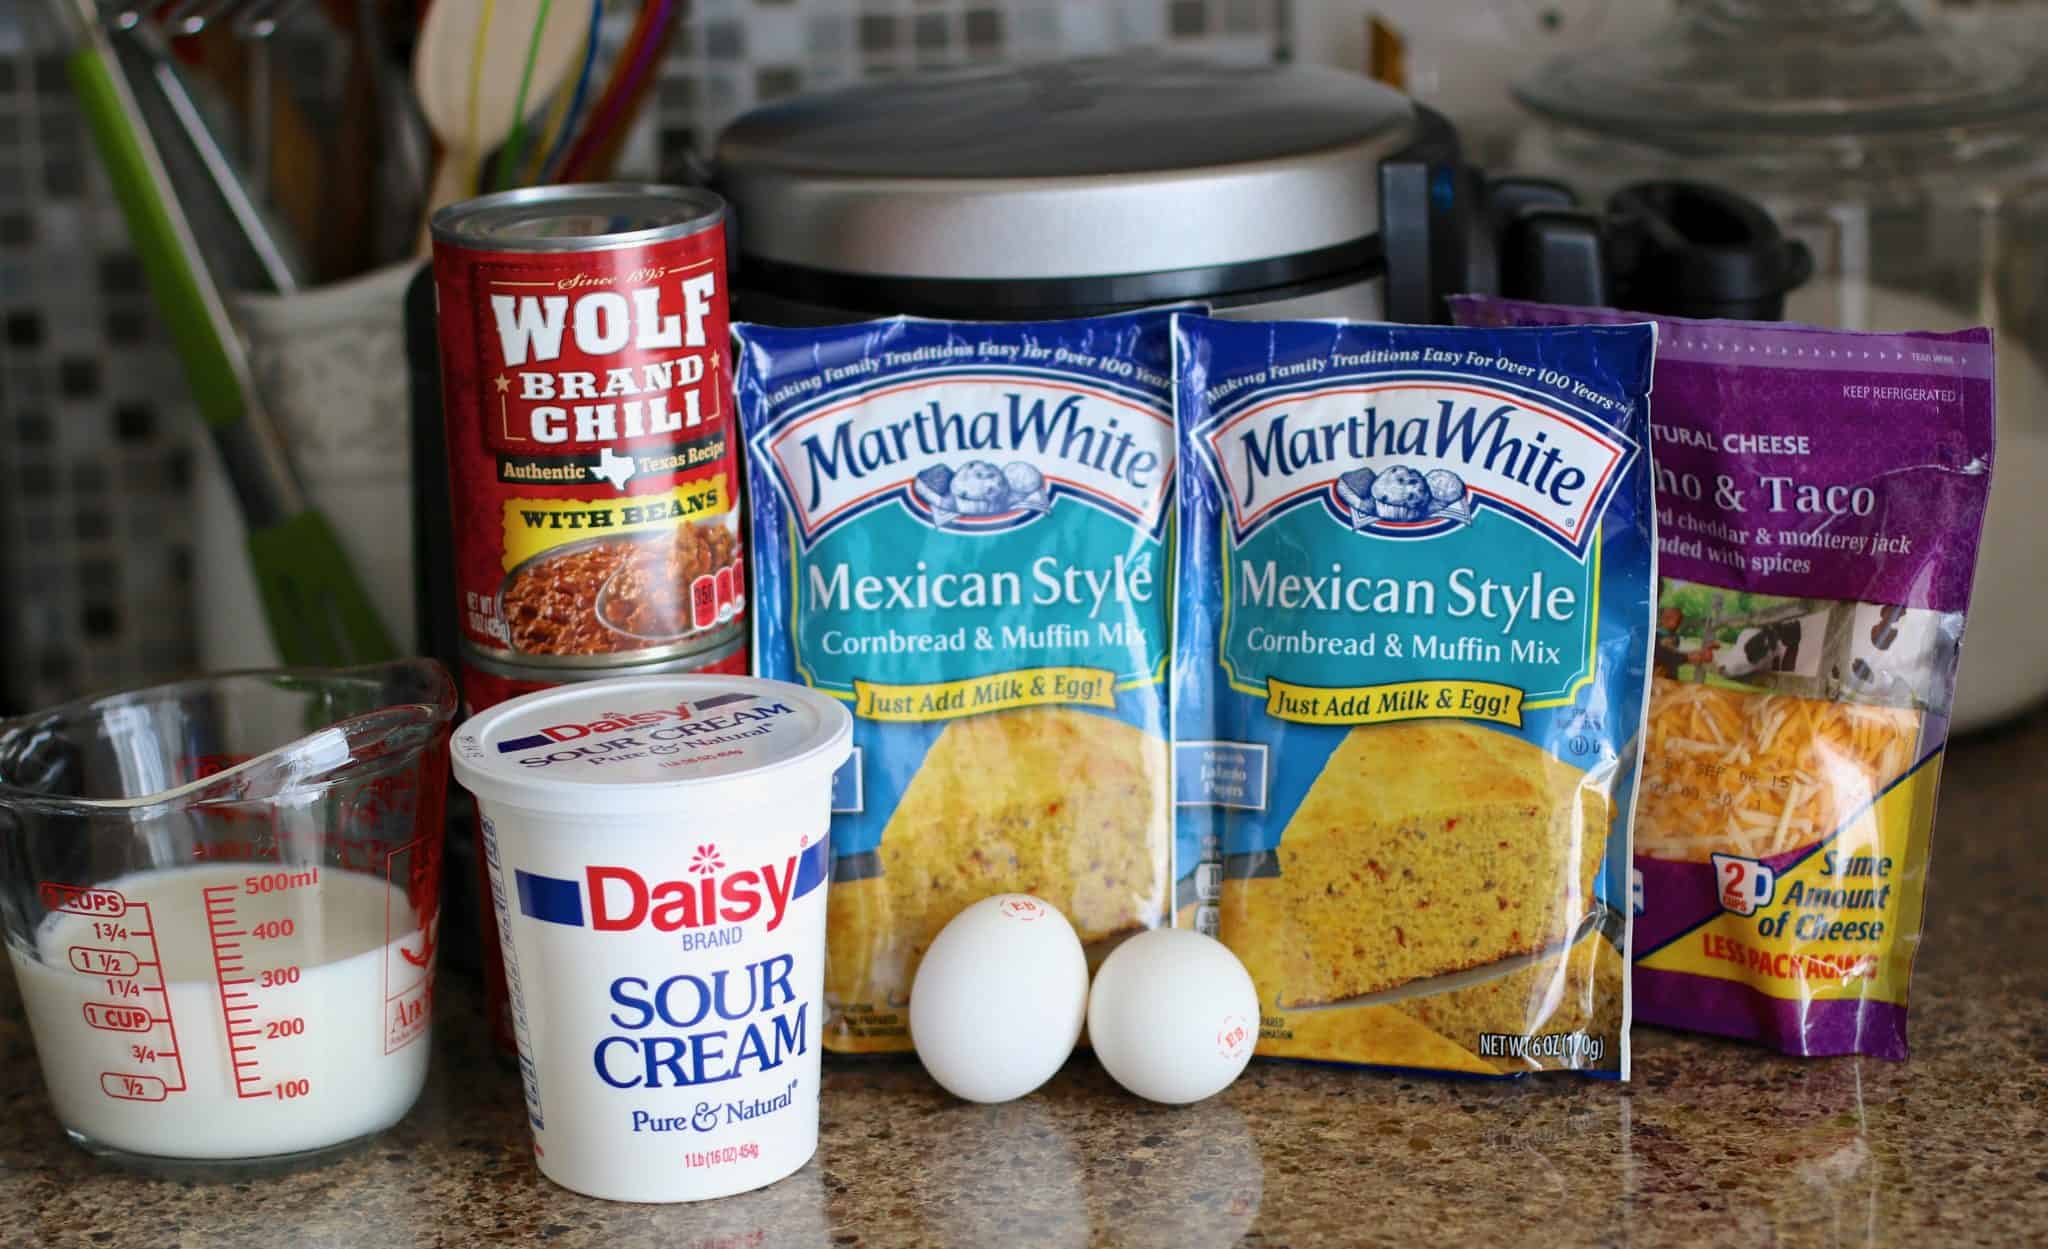 two packets of Mexican Style cornbread, two cans of wolf brand chili, shredded cheddar cheese, two eggs, a tub of sour cream and milk in am measuring cup. 